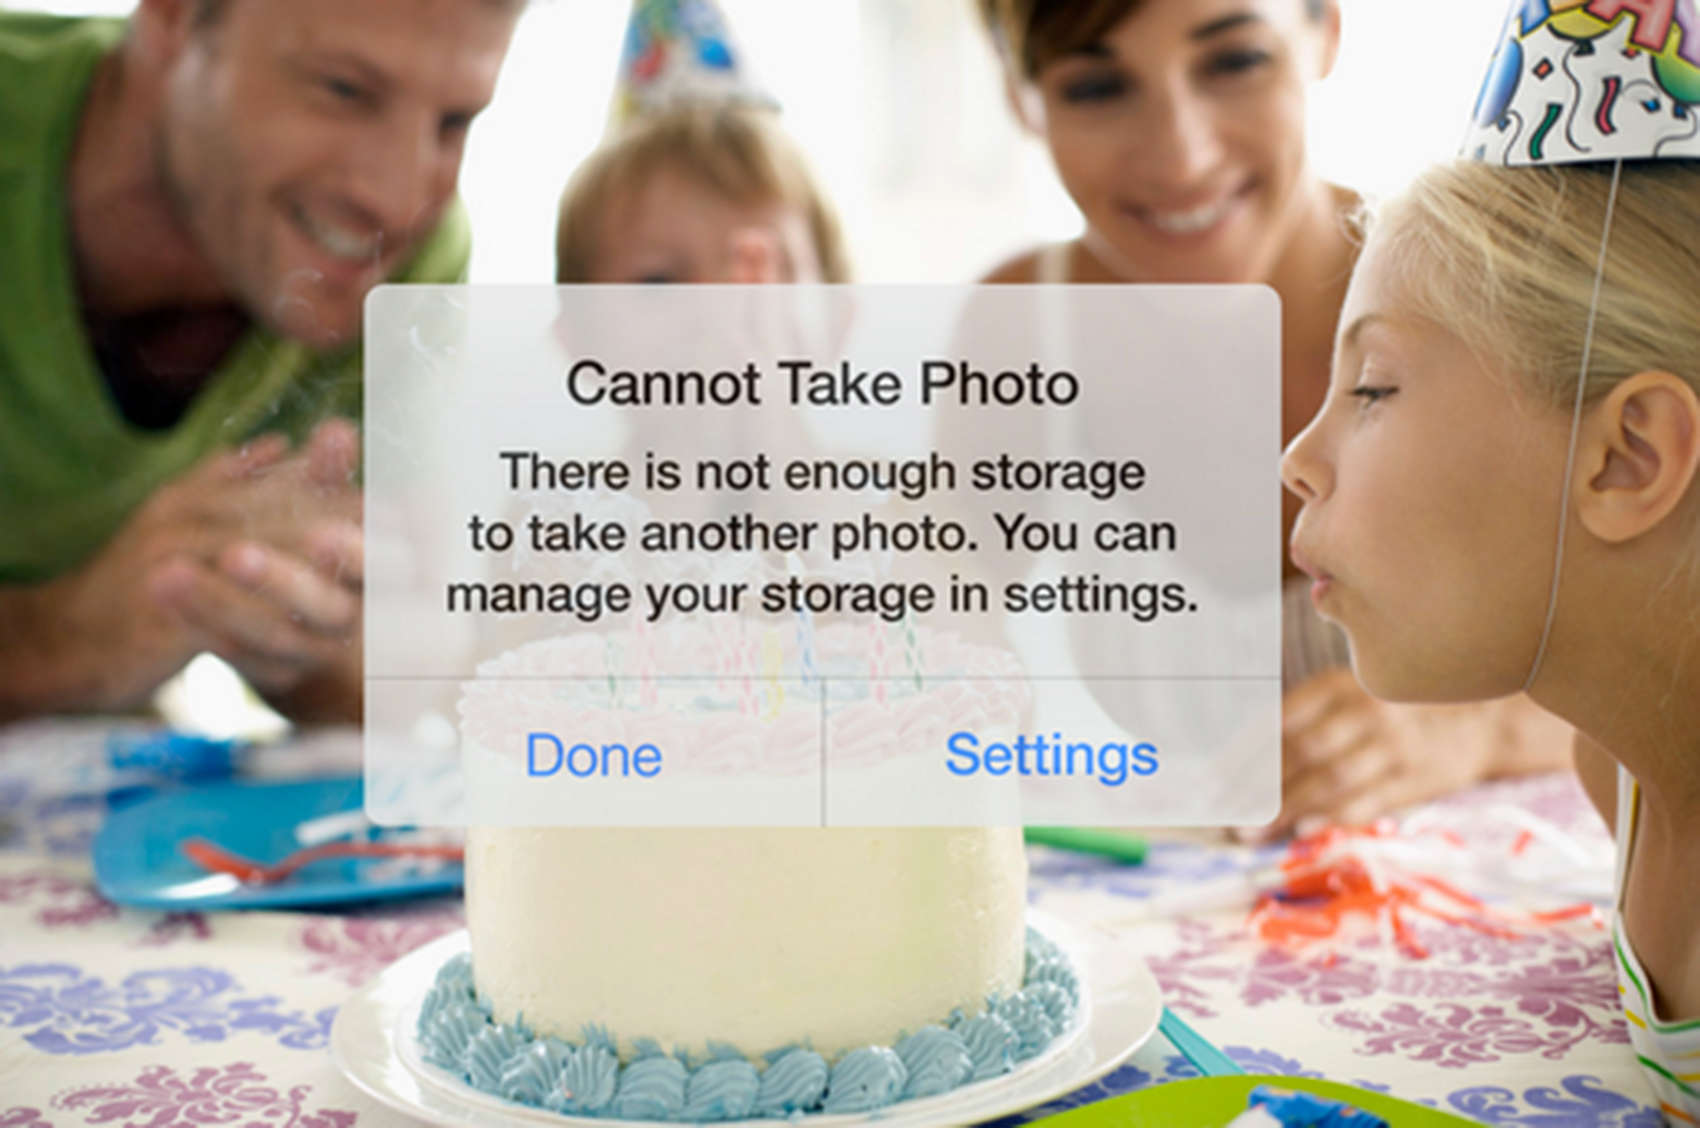 Avoid this message with the IceCream app, which quickly helps free your storage to continue shooting photos.